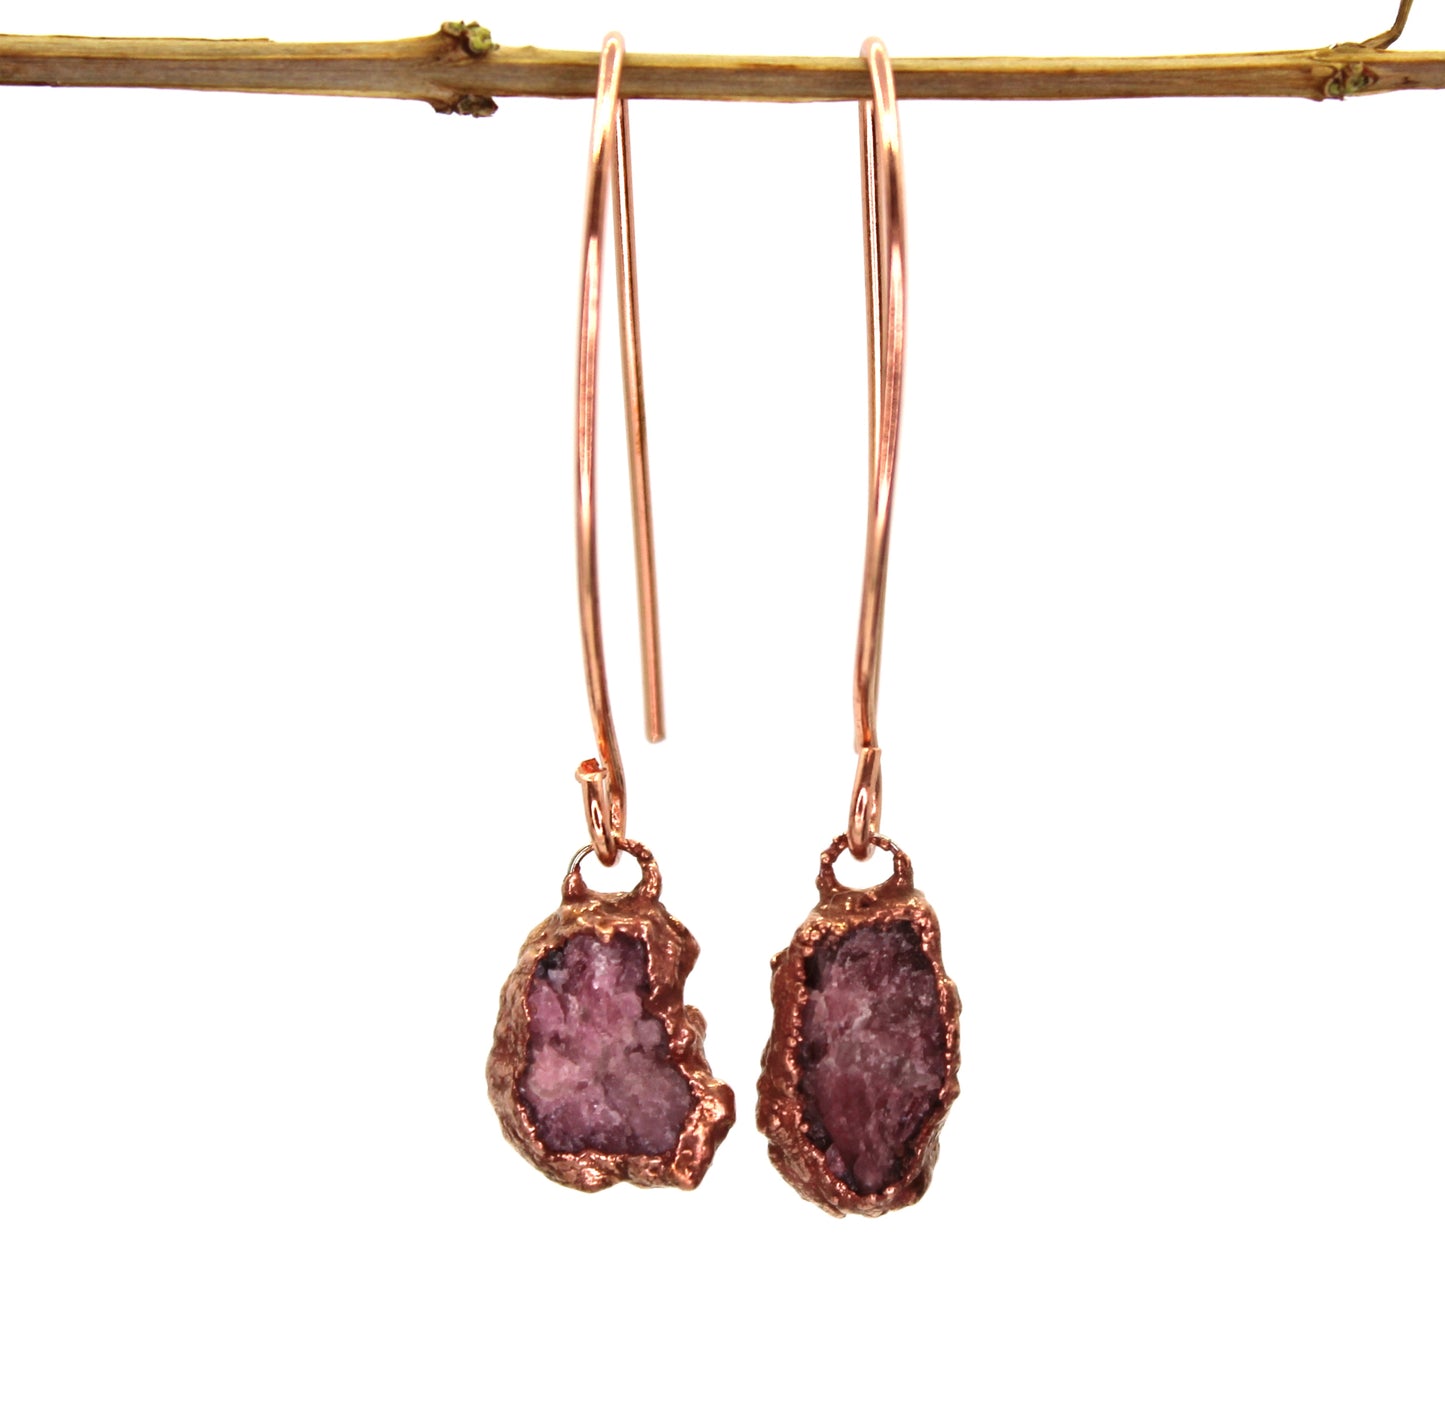 Large Pink Tourmaline Long Dangly Earrings (October Birthstone)